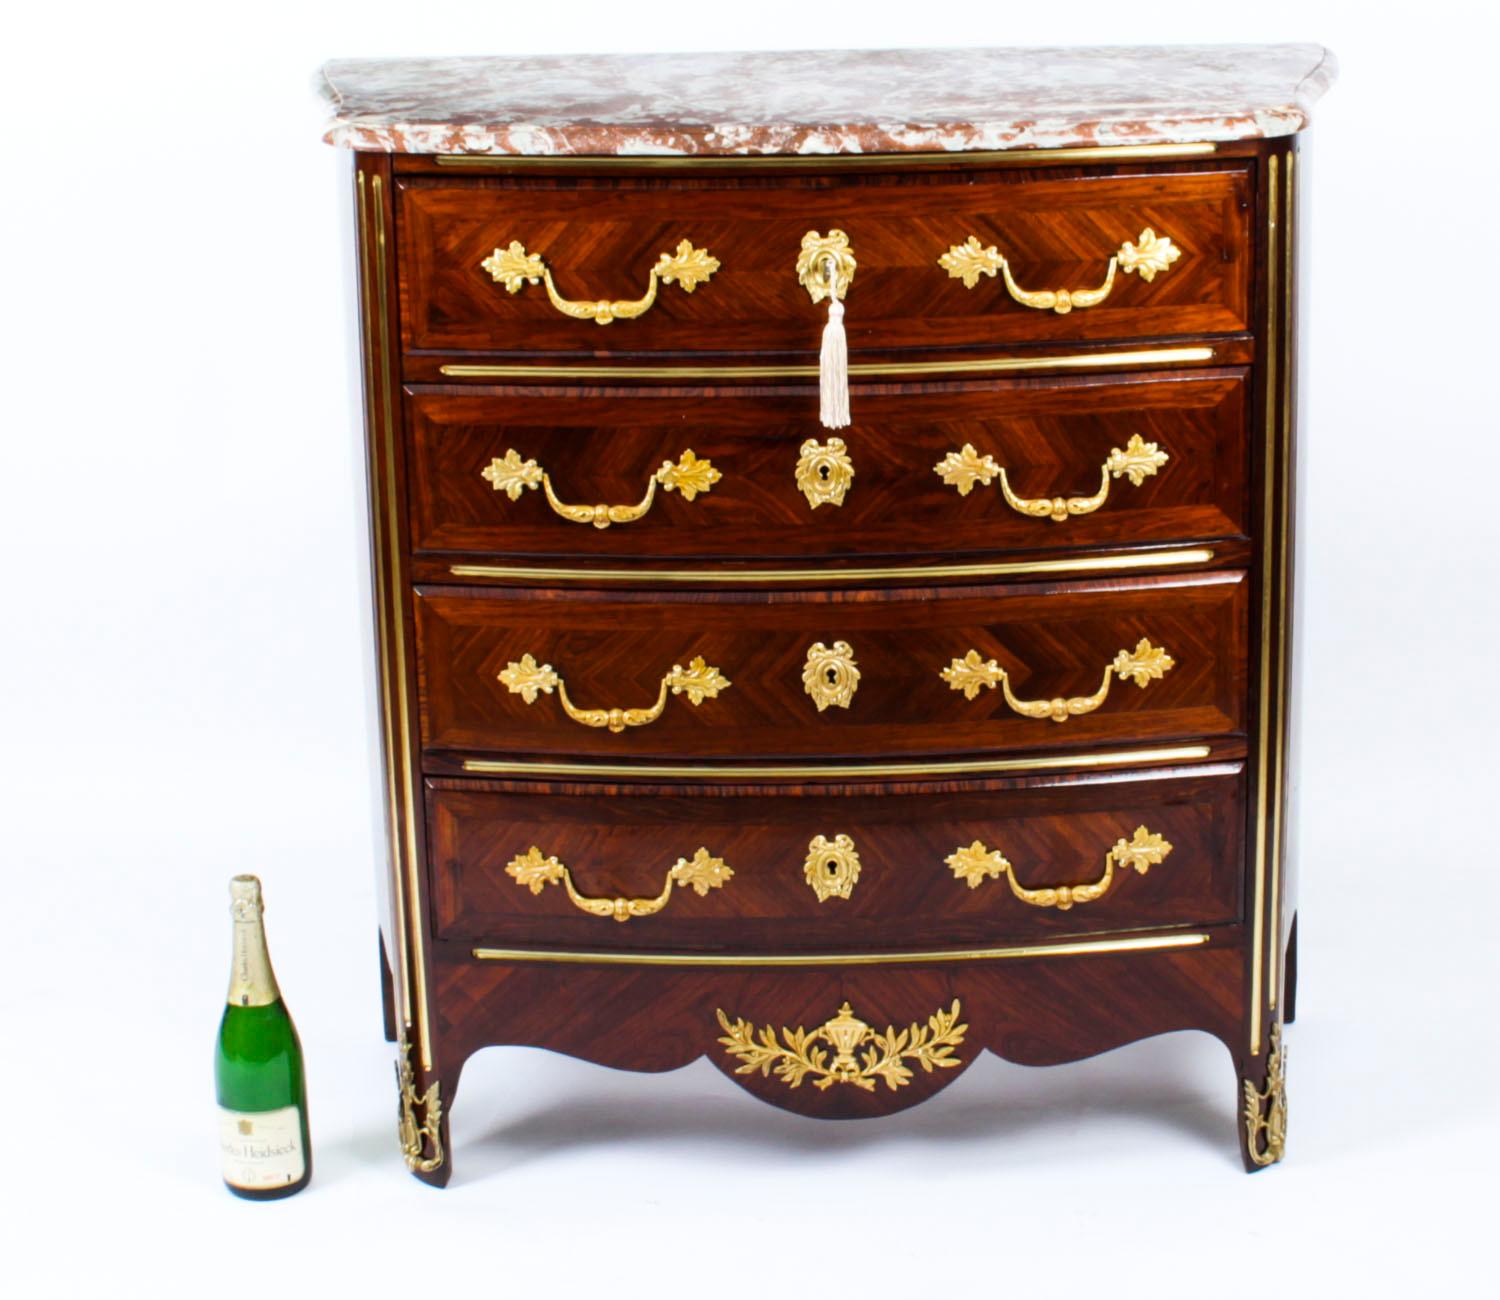 Antique Marble Topped Ormolu-Mounted Goncalo Alves Commode Chest, 19th Century 13